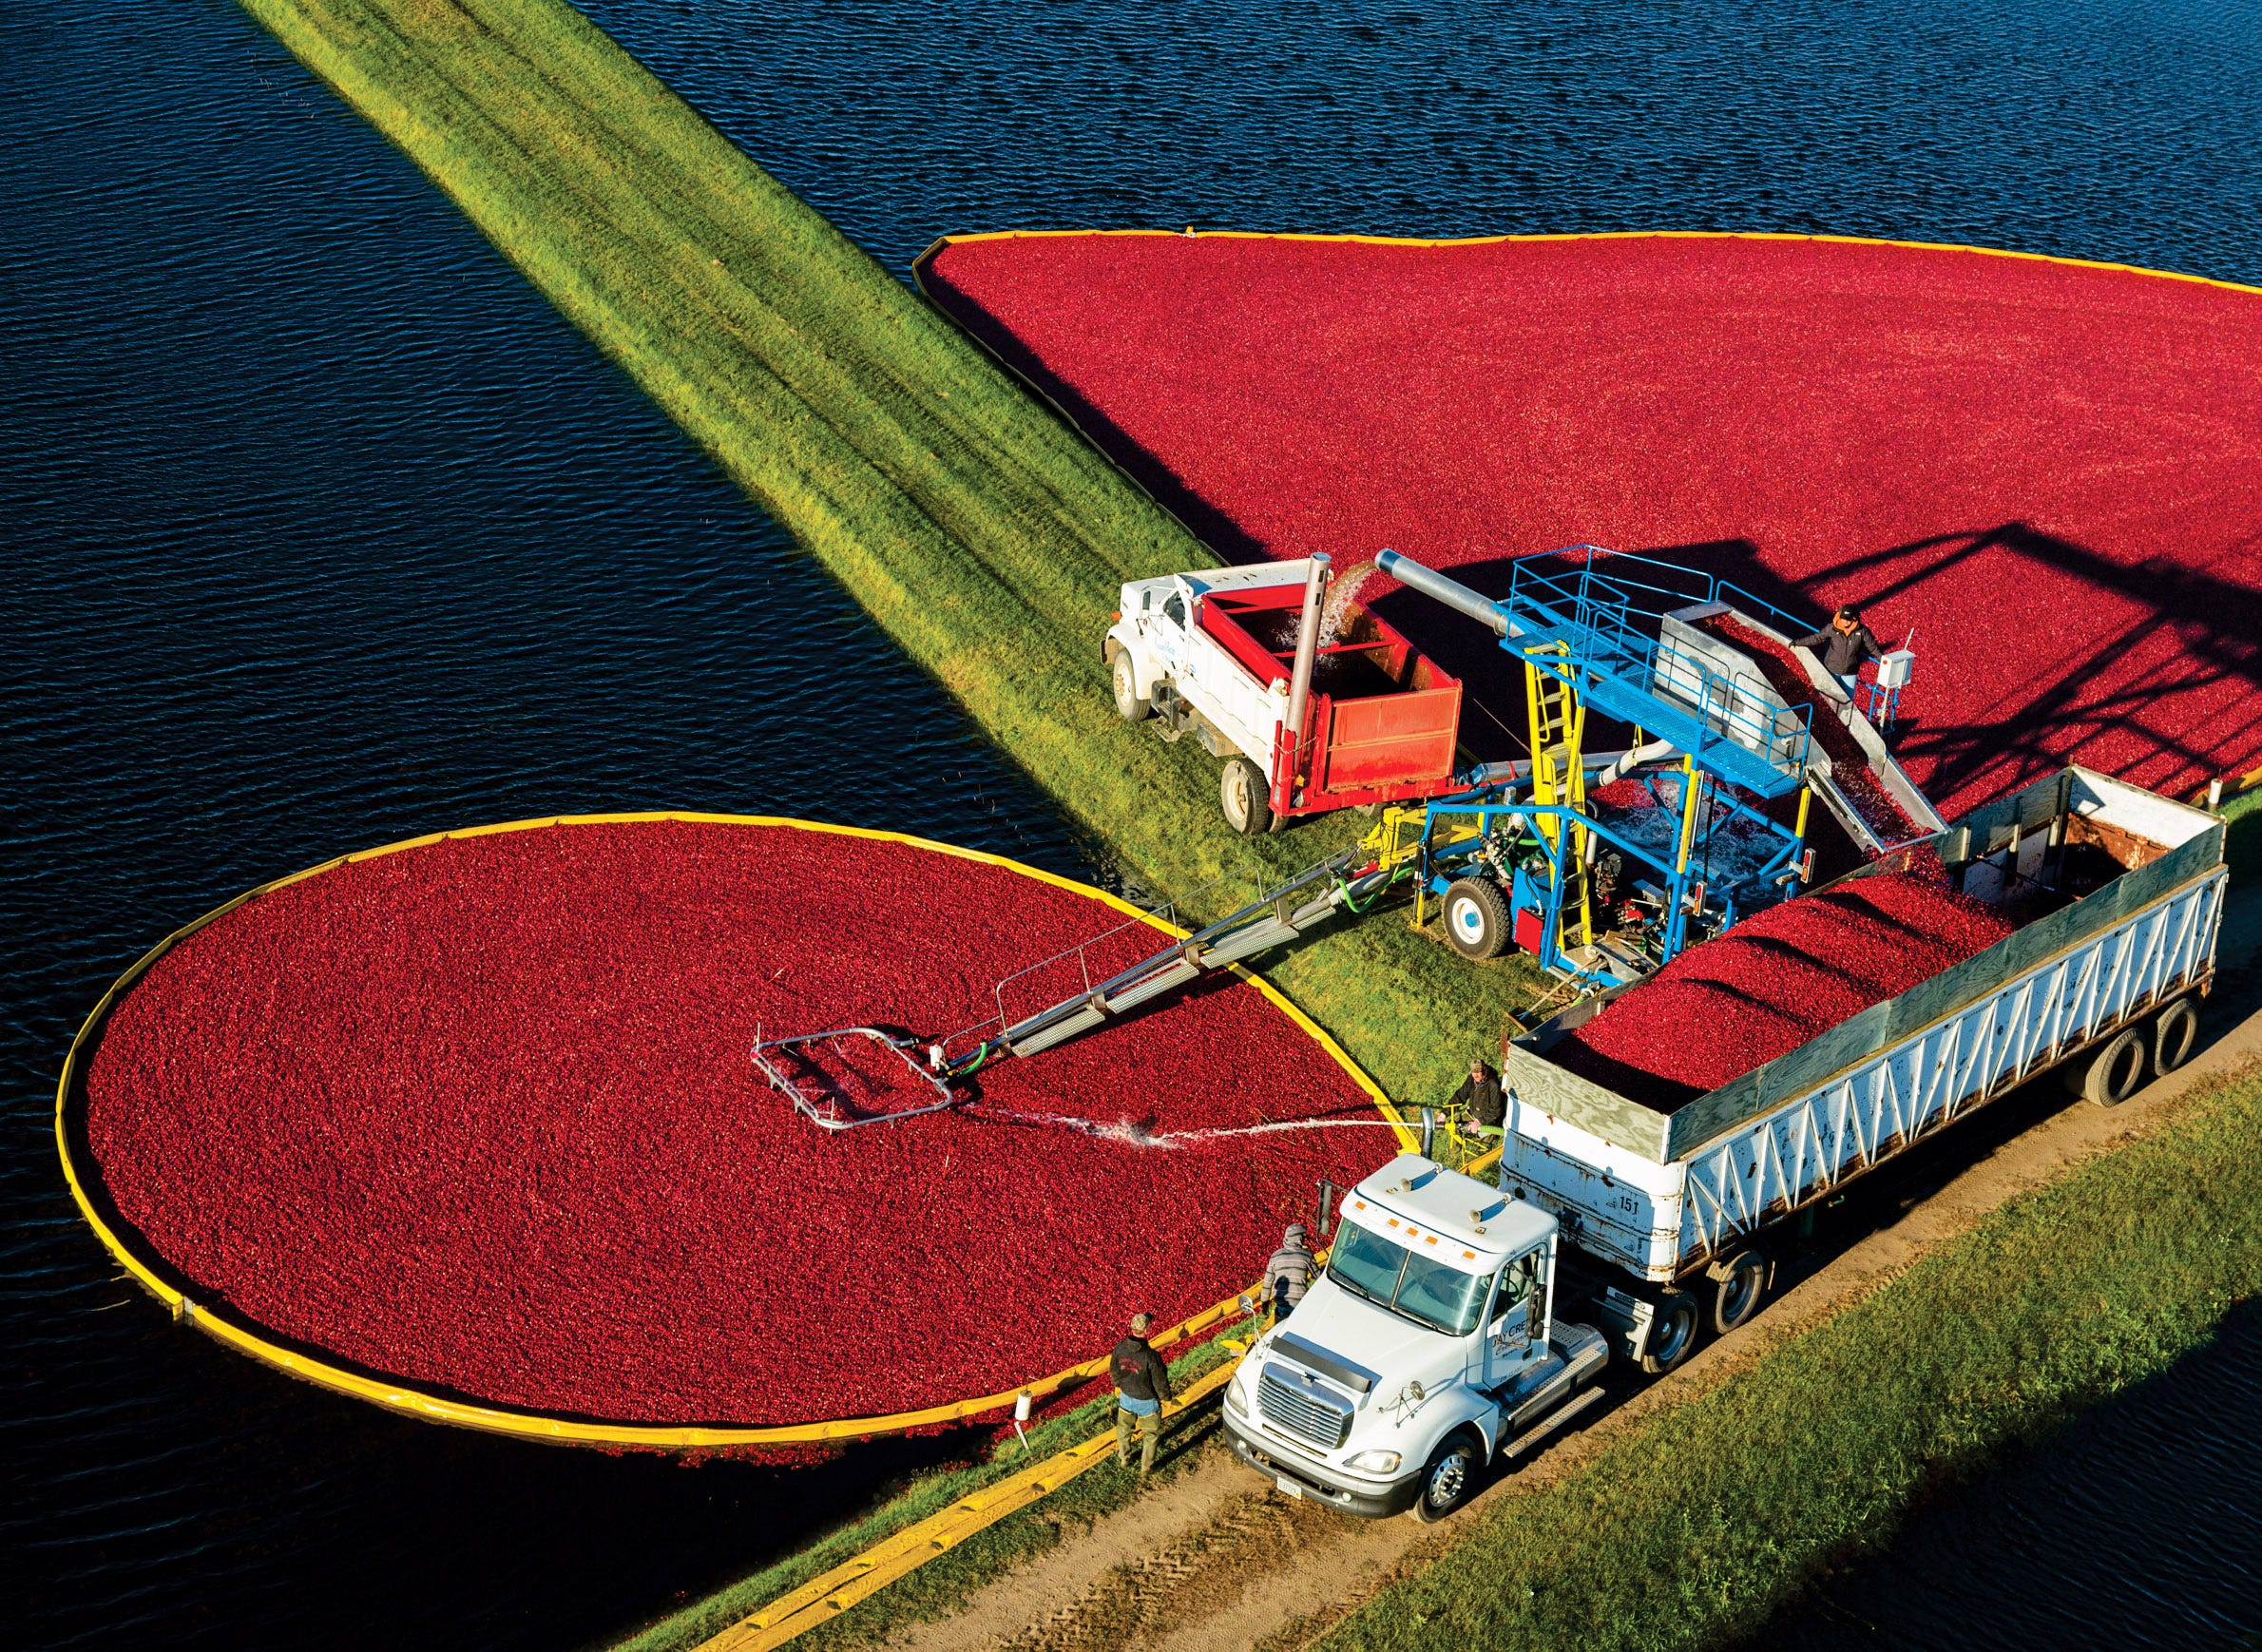 The town of Warrens in Monroe County, where these cranberries are being harvested, is the epicenter of cranberry production in Wisconsin.